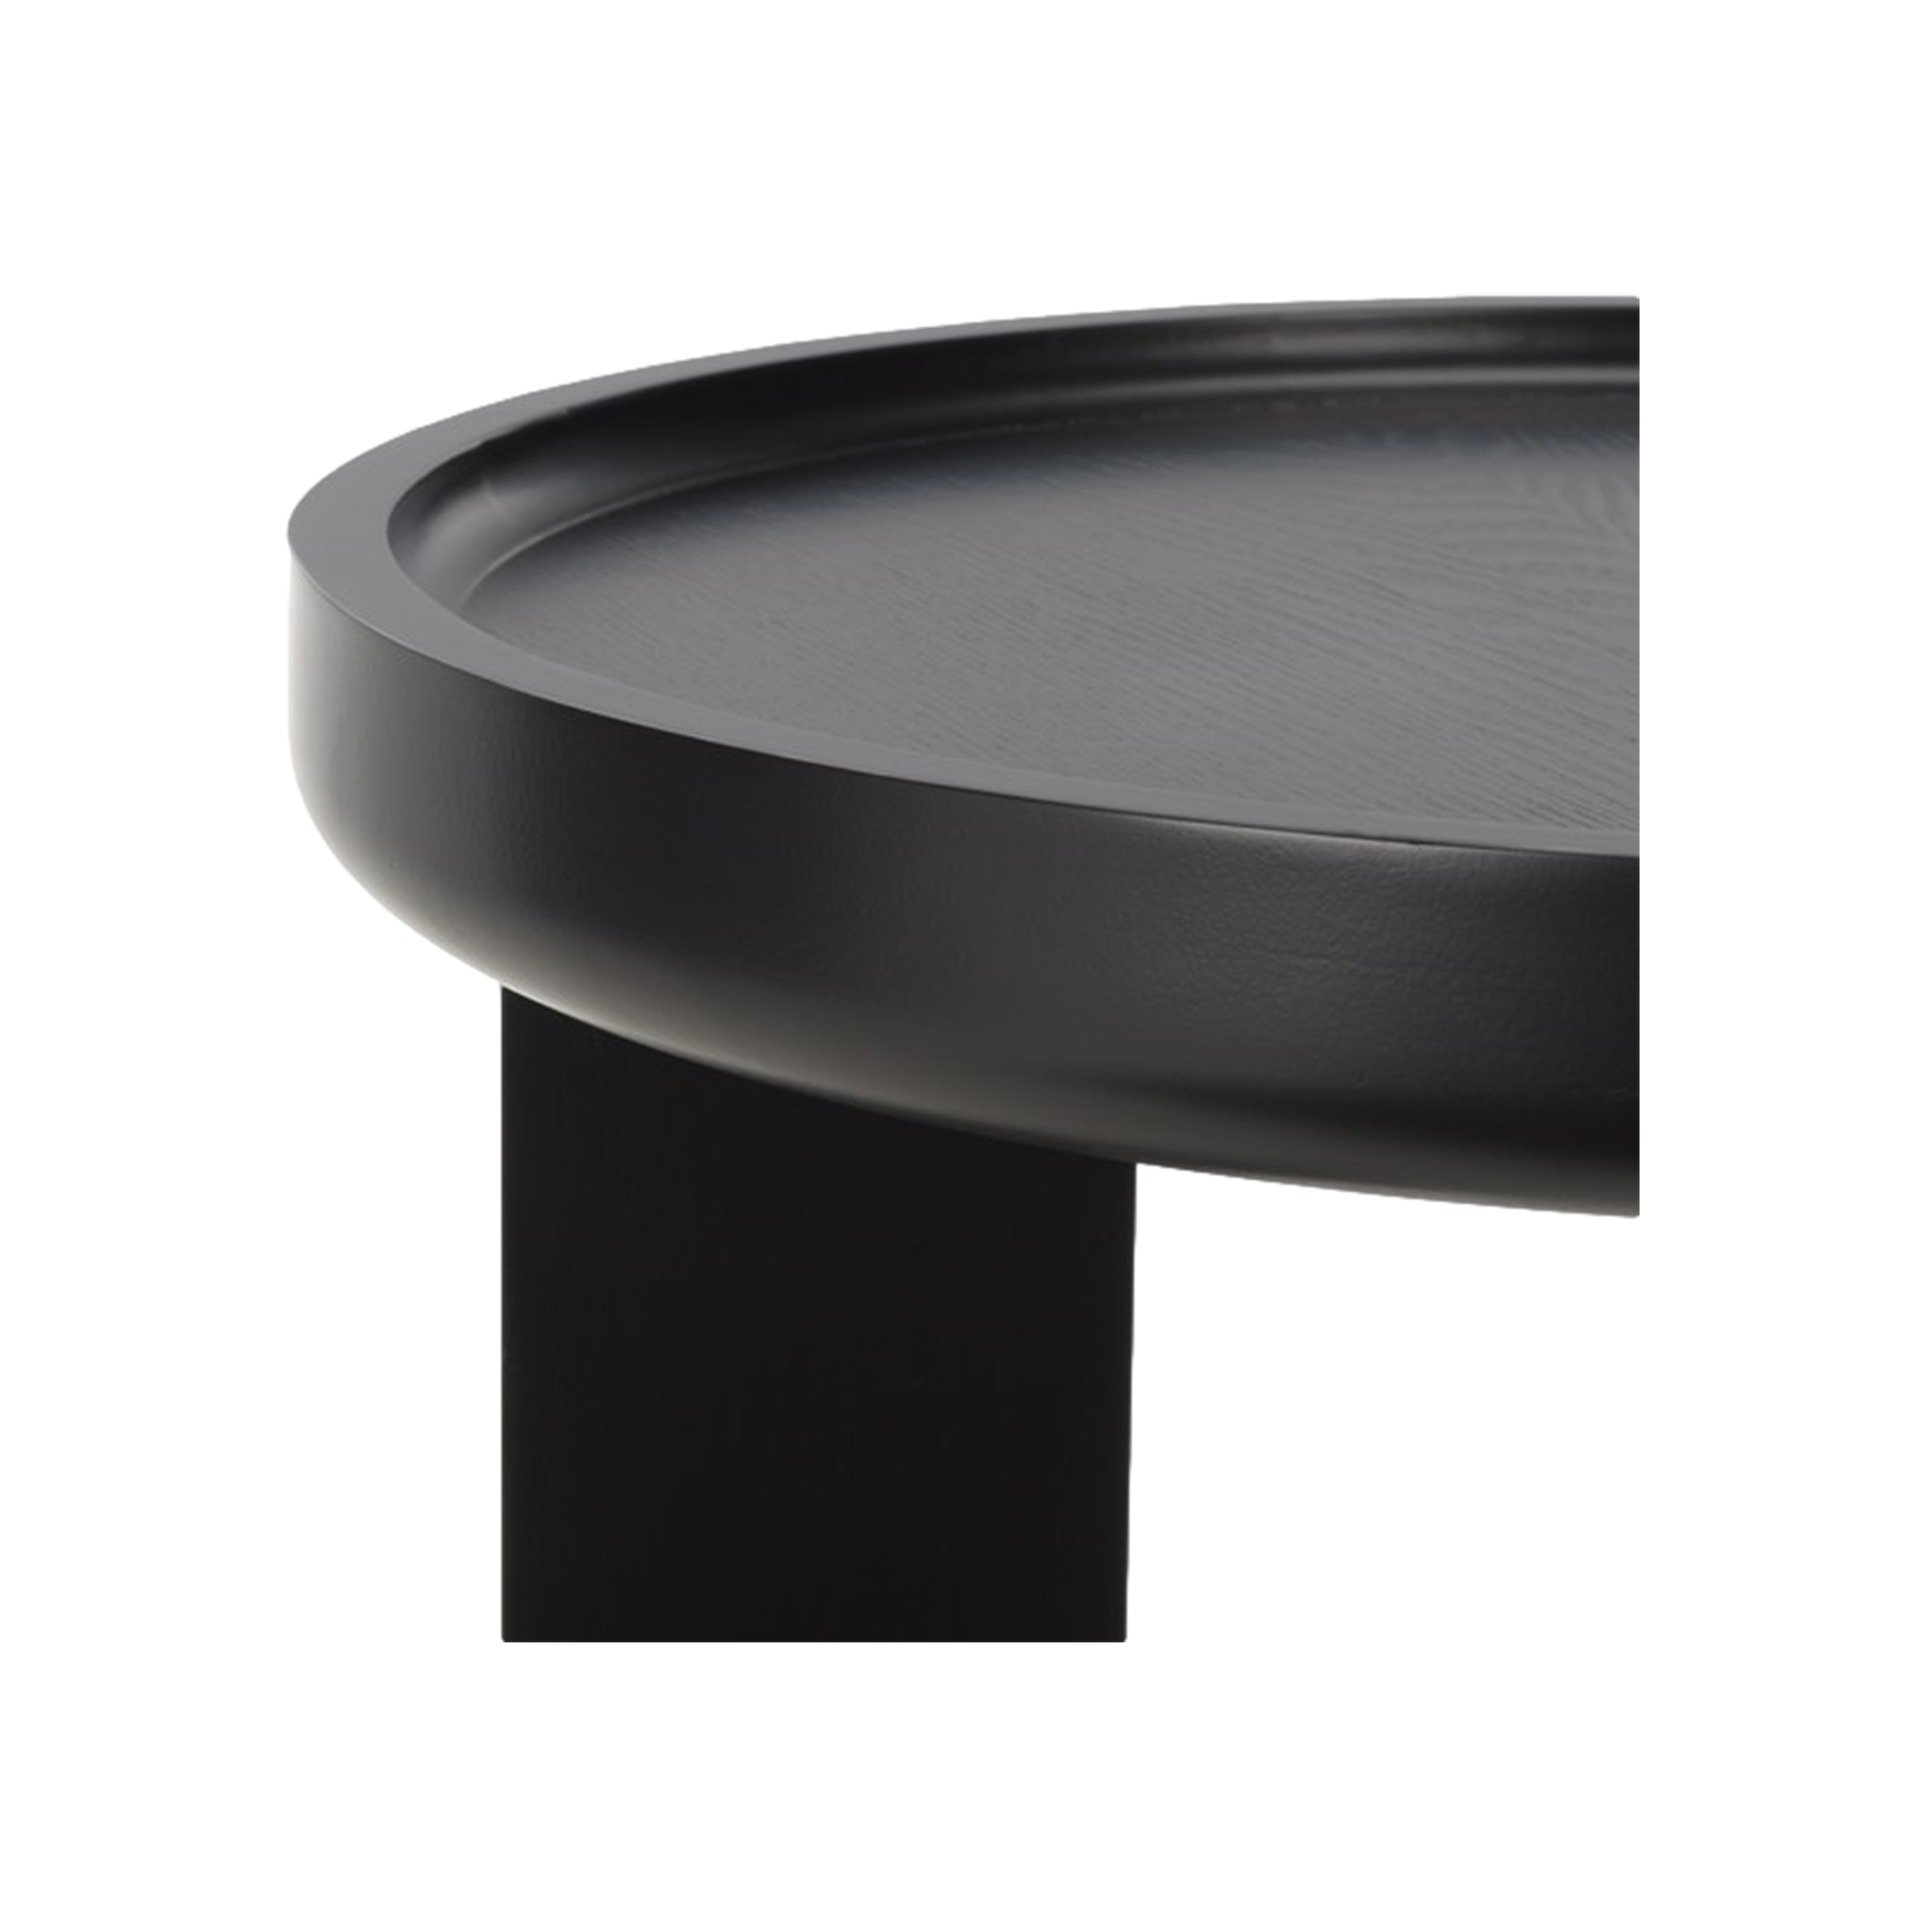 Malyn Accent Table (Black)